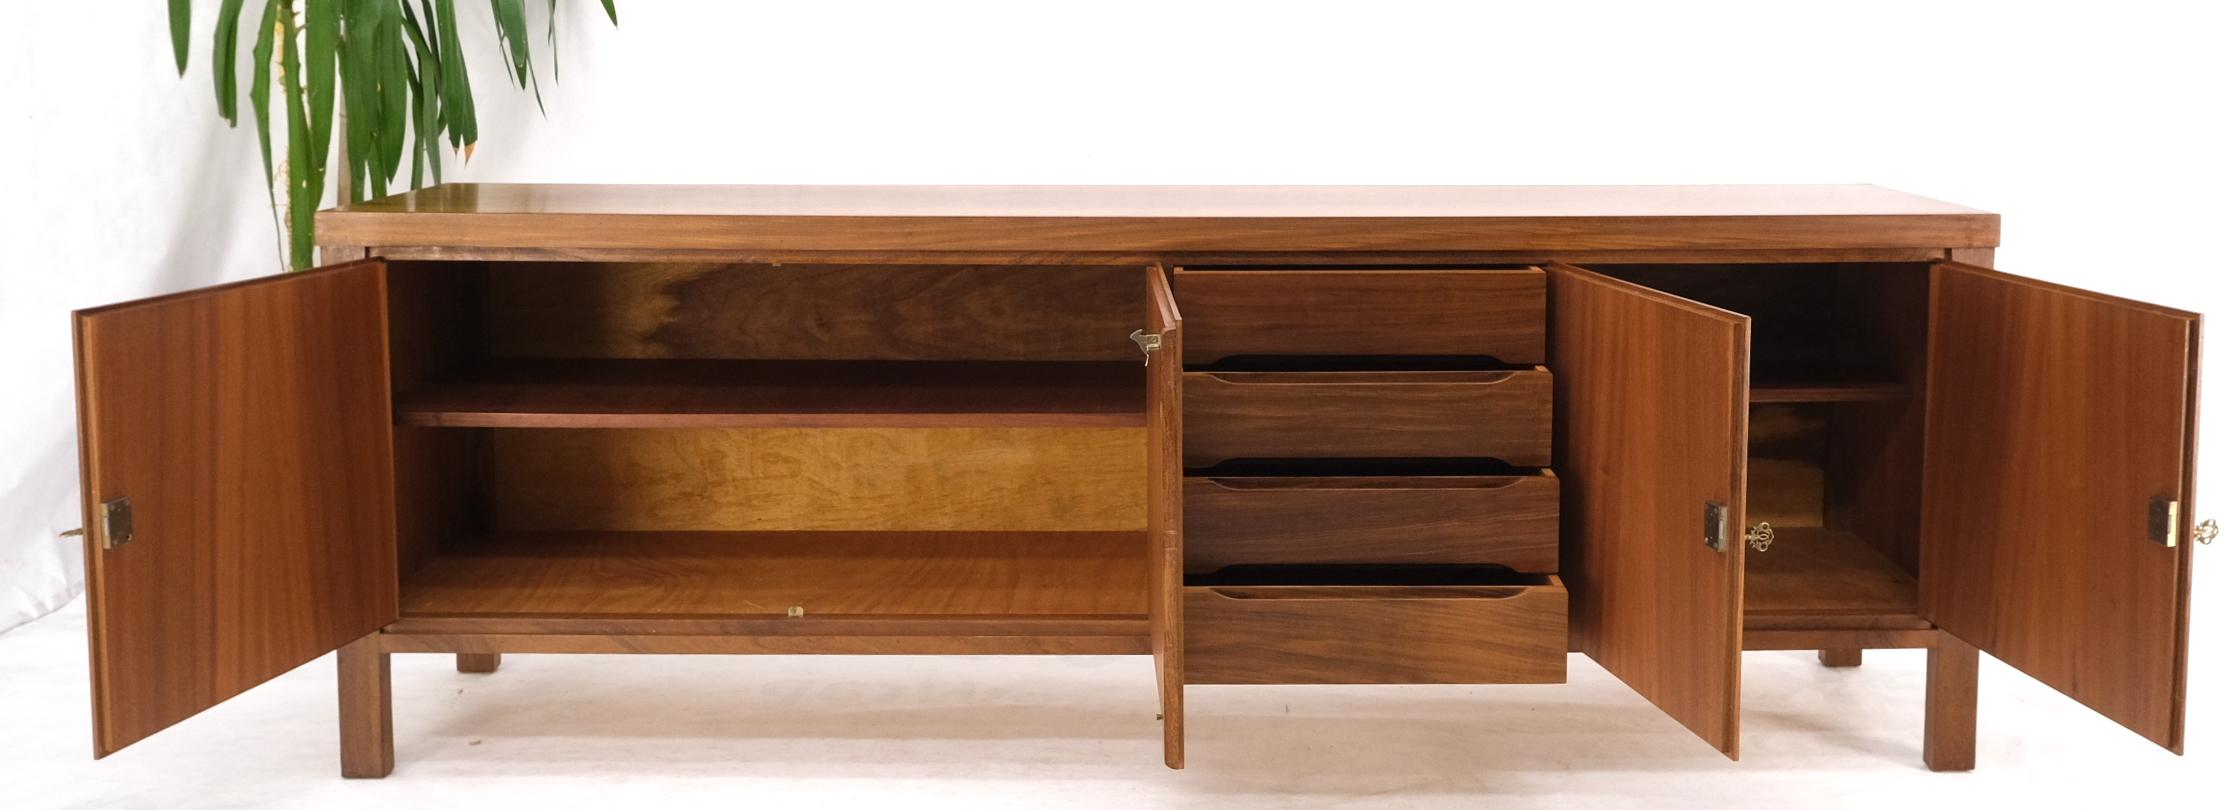 Long Rosewood Danish Mid-Century Modern 4 Doors Drawers Credenza Finished Back For Sale 1